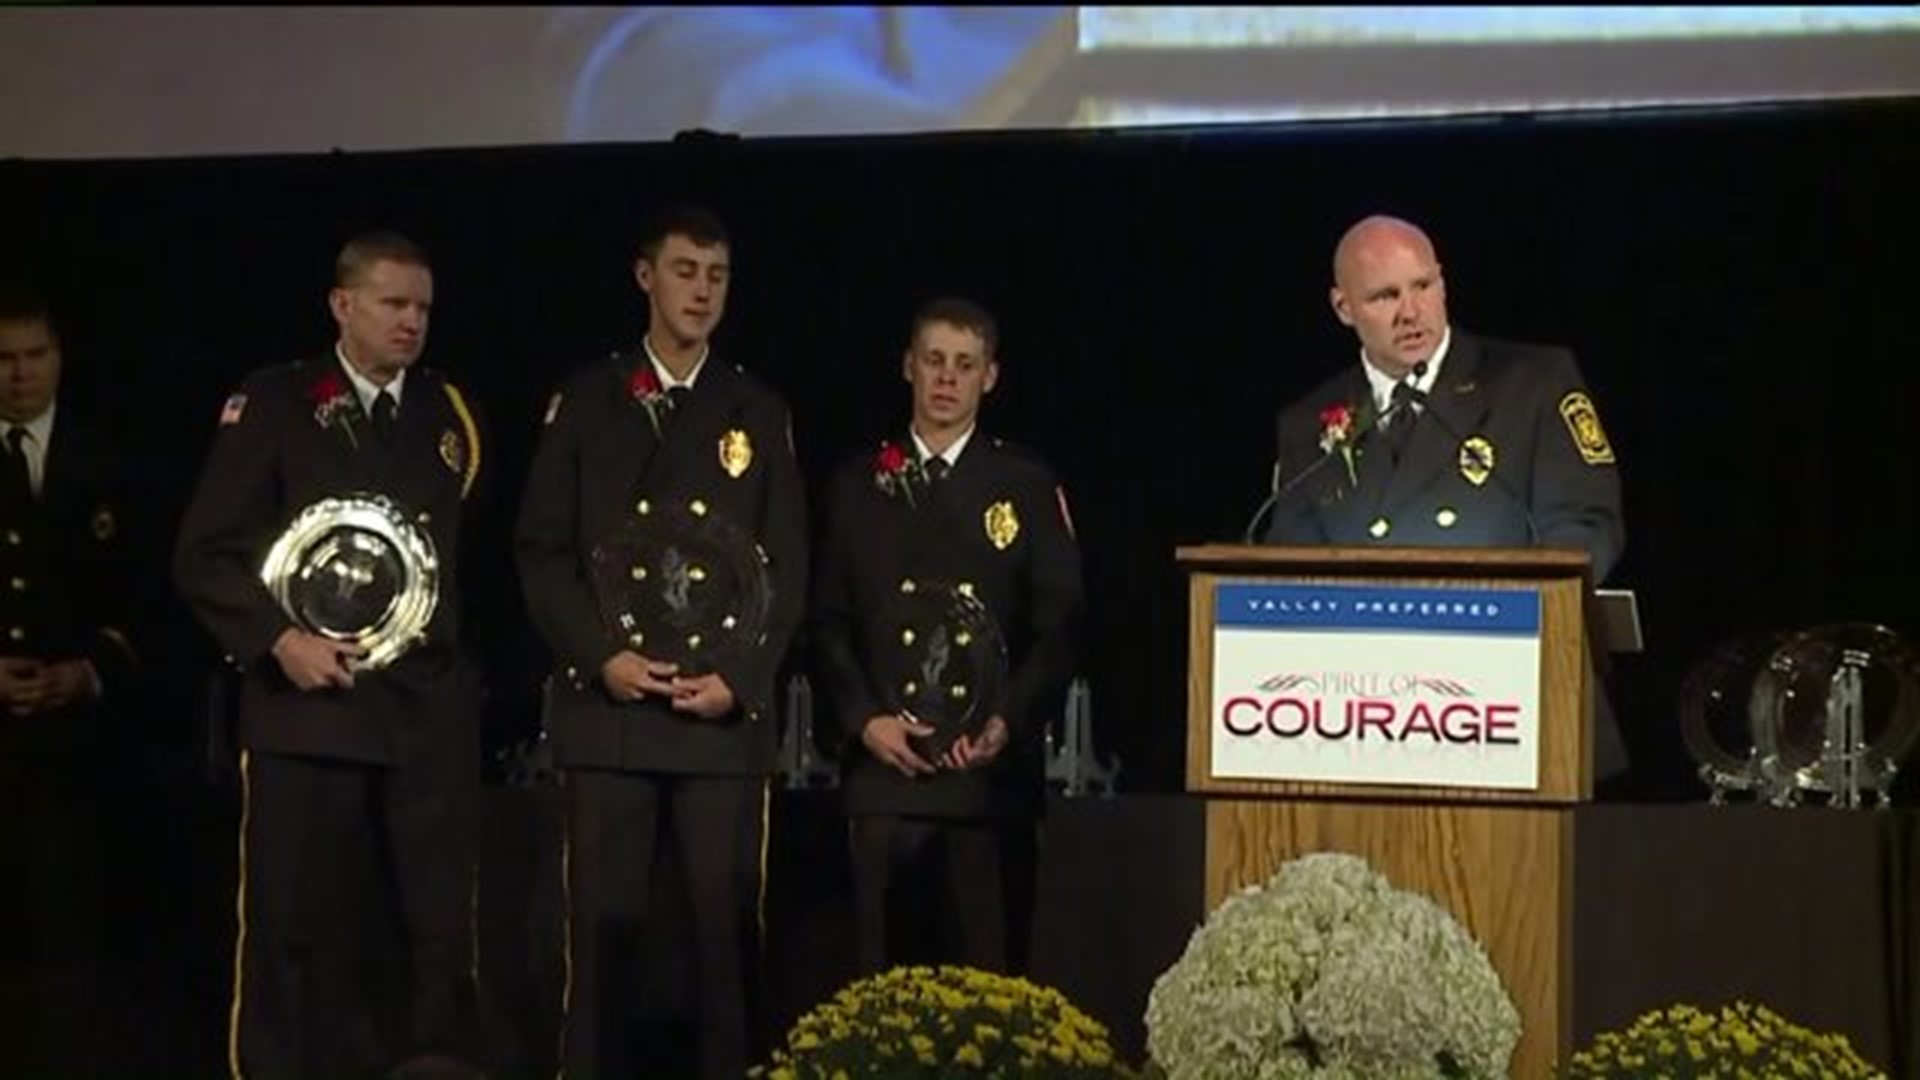 Four Firefighters from Schuylkill County Given 'Spirit of Courage' Award